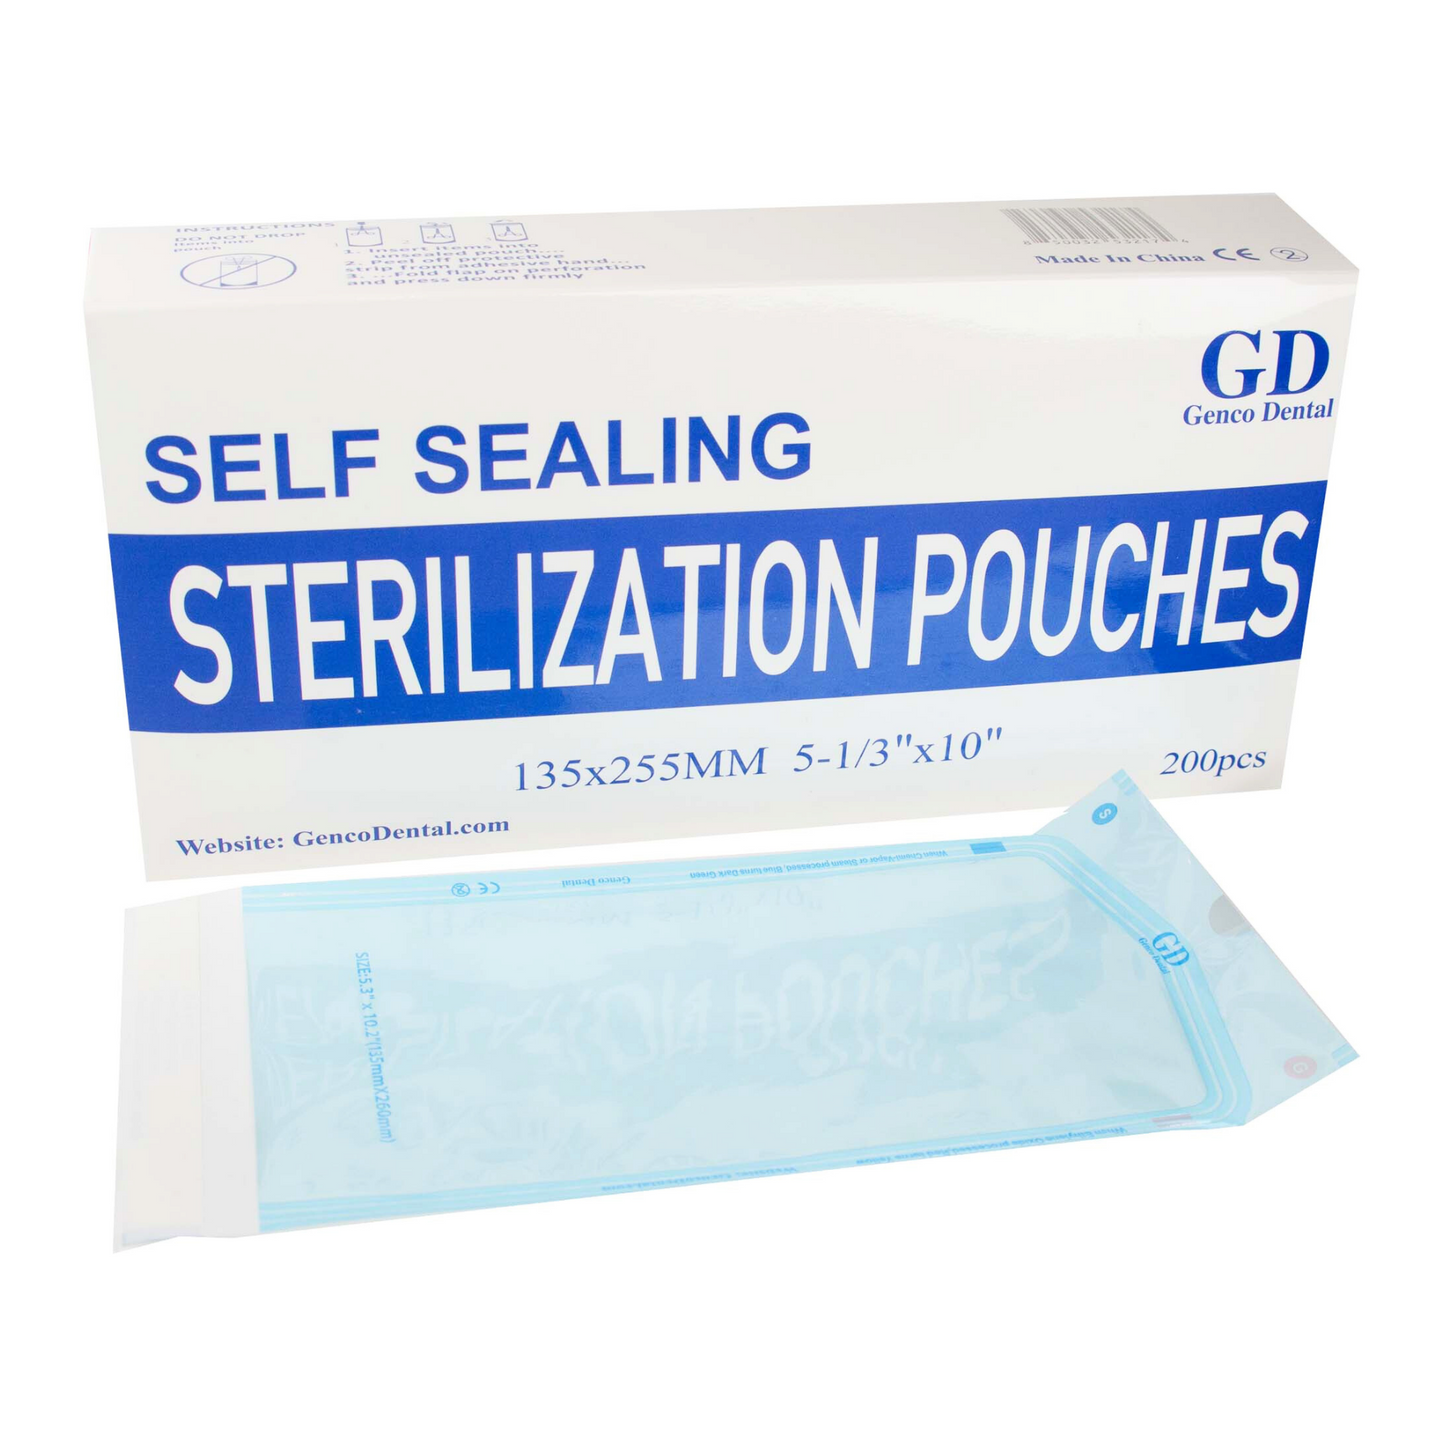 Self Seal Sterilization Pouches for Dentists, Autoclave Sterilizer Bags for Cleaning Tools, 200 Pouches Per Box